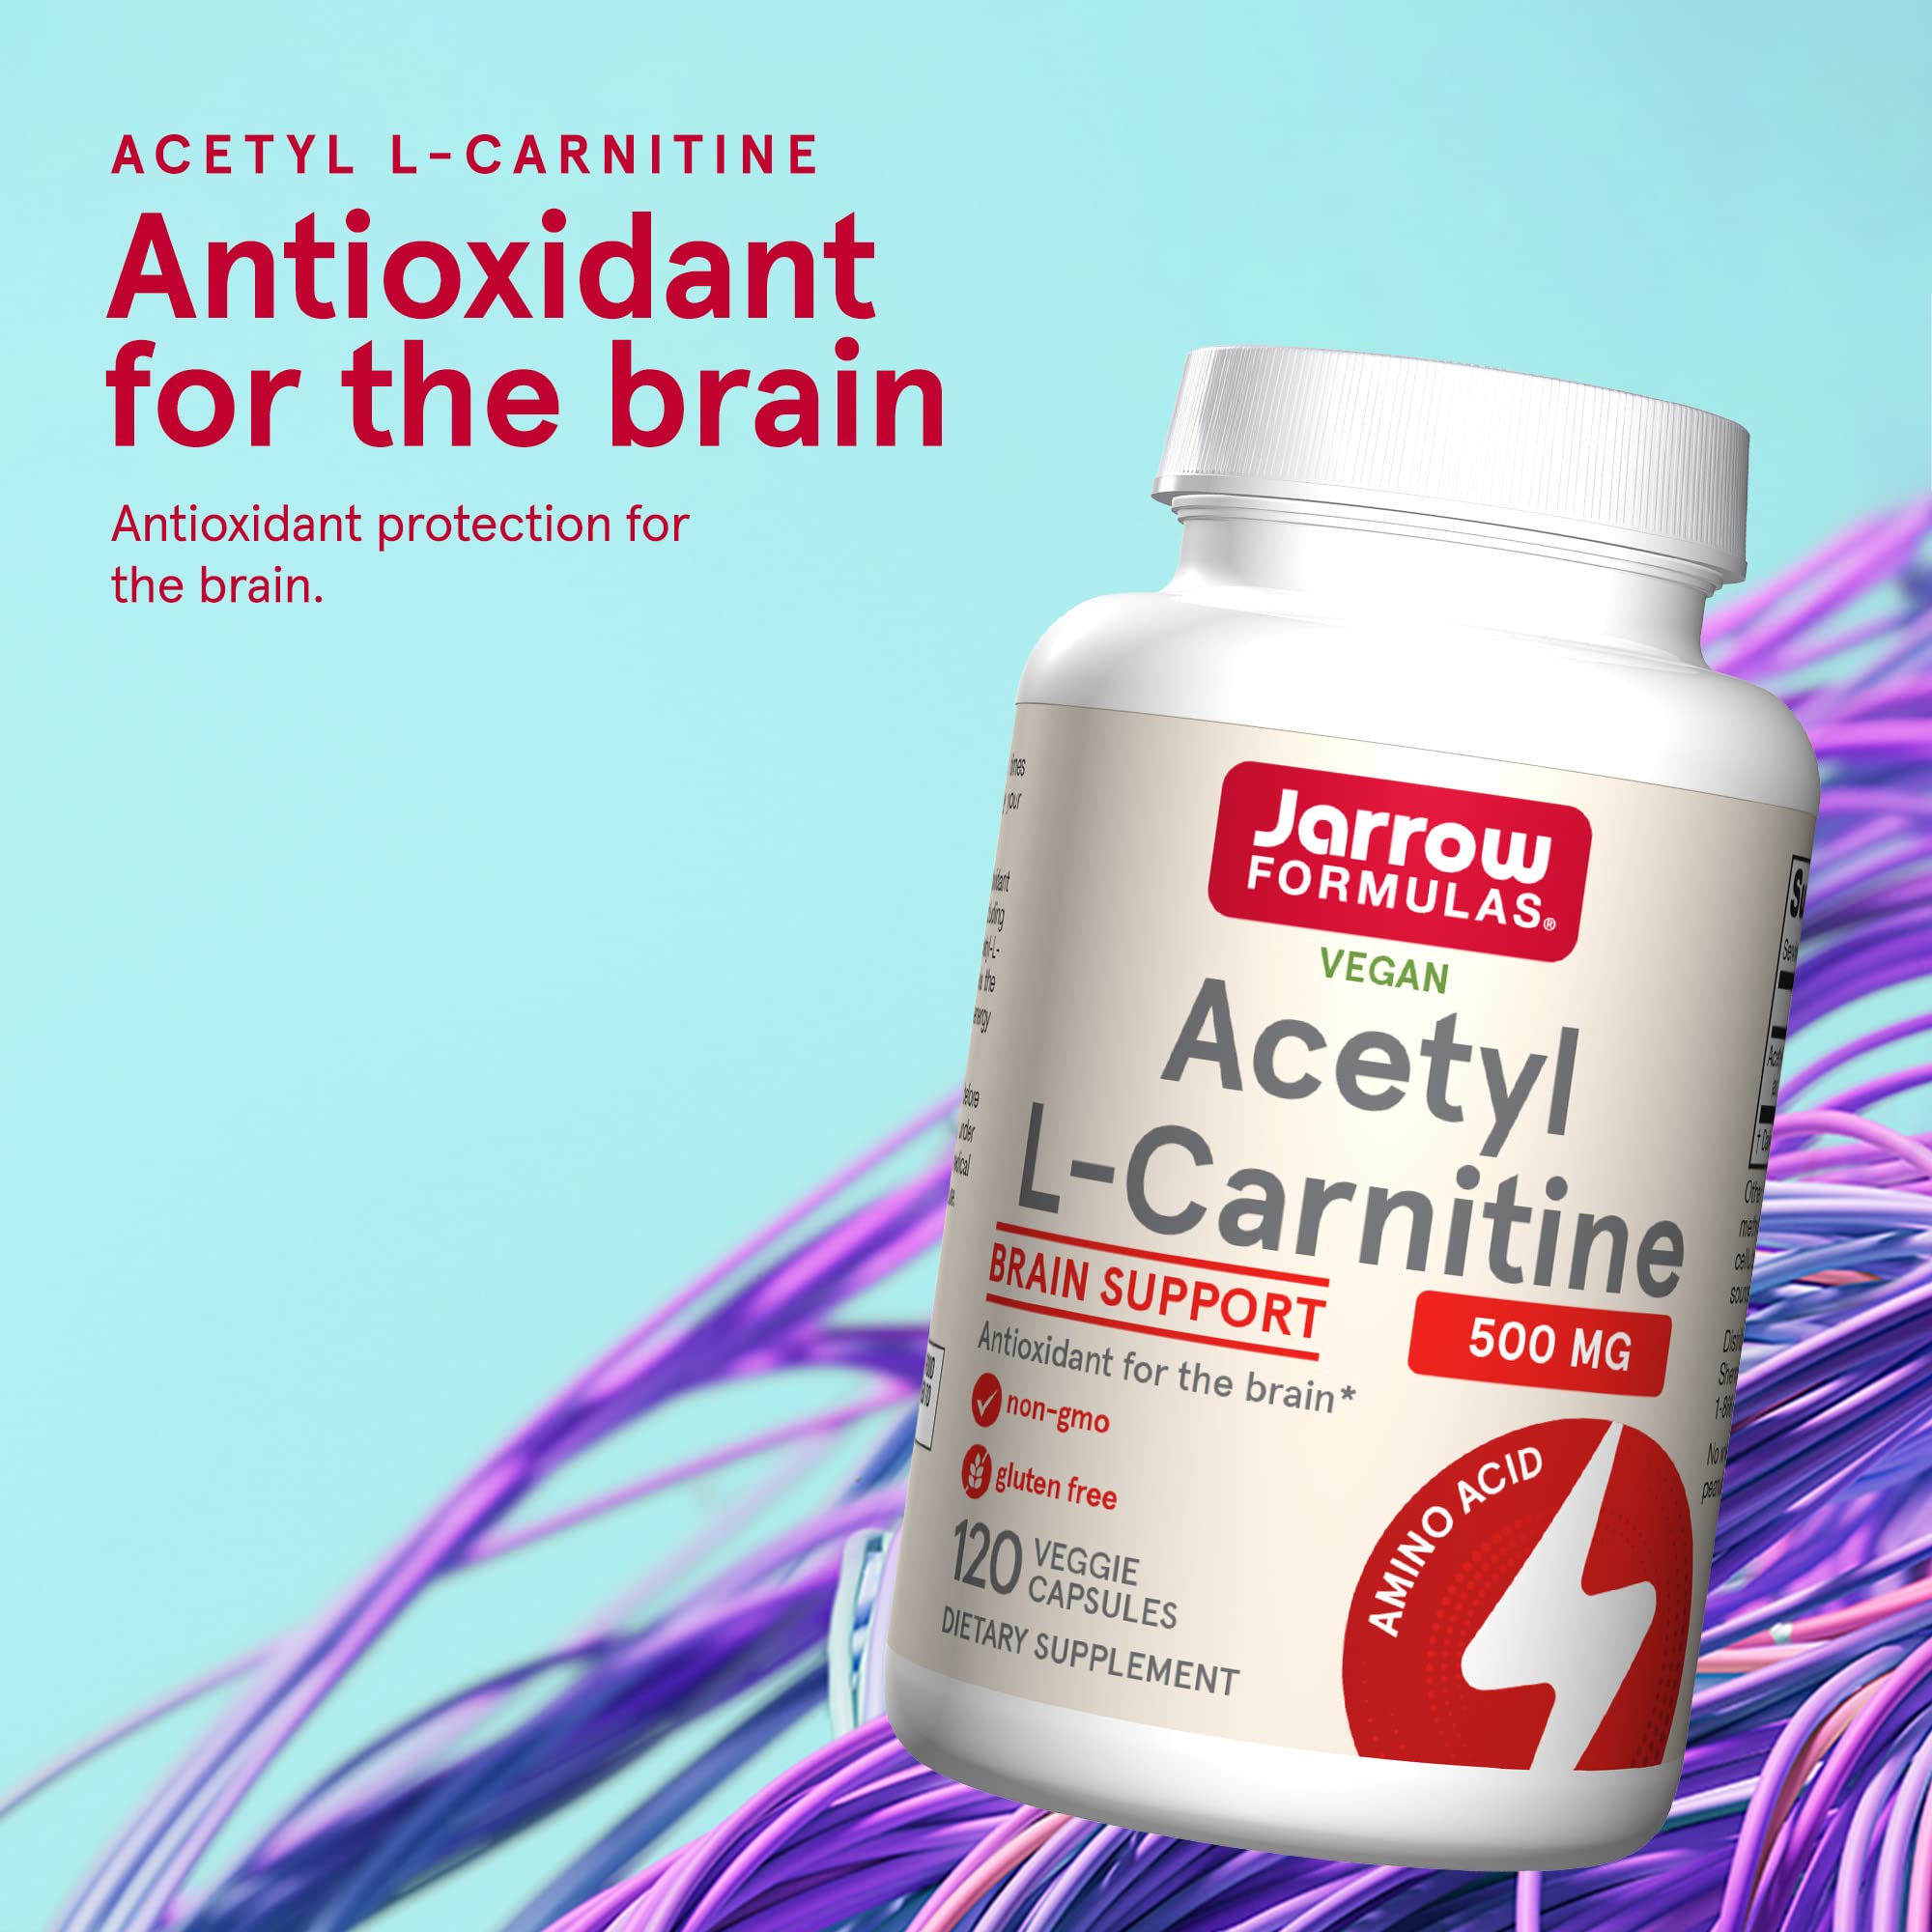 Jarrow Formulas Acetyl L-Carnitine 500 mg - Antioxidant Protection for the Brain - Supports Energy Production & Metabolism - Heart & Cardiovascular Health - 120 Veggie Capsules (PACKAGING MAY VARY)